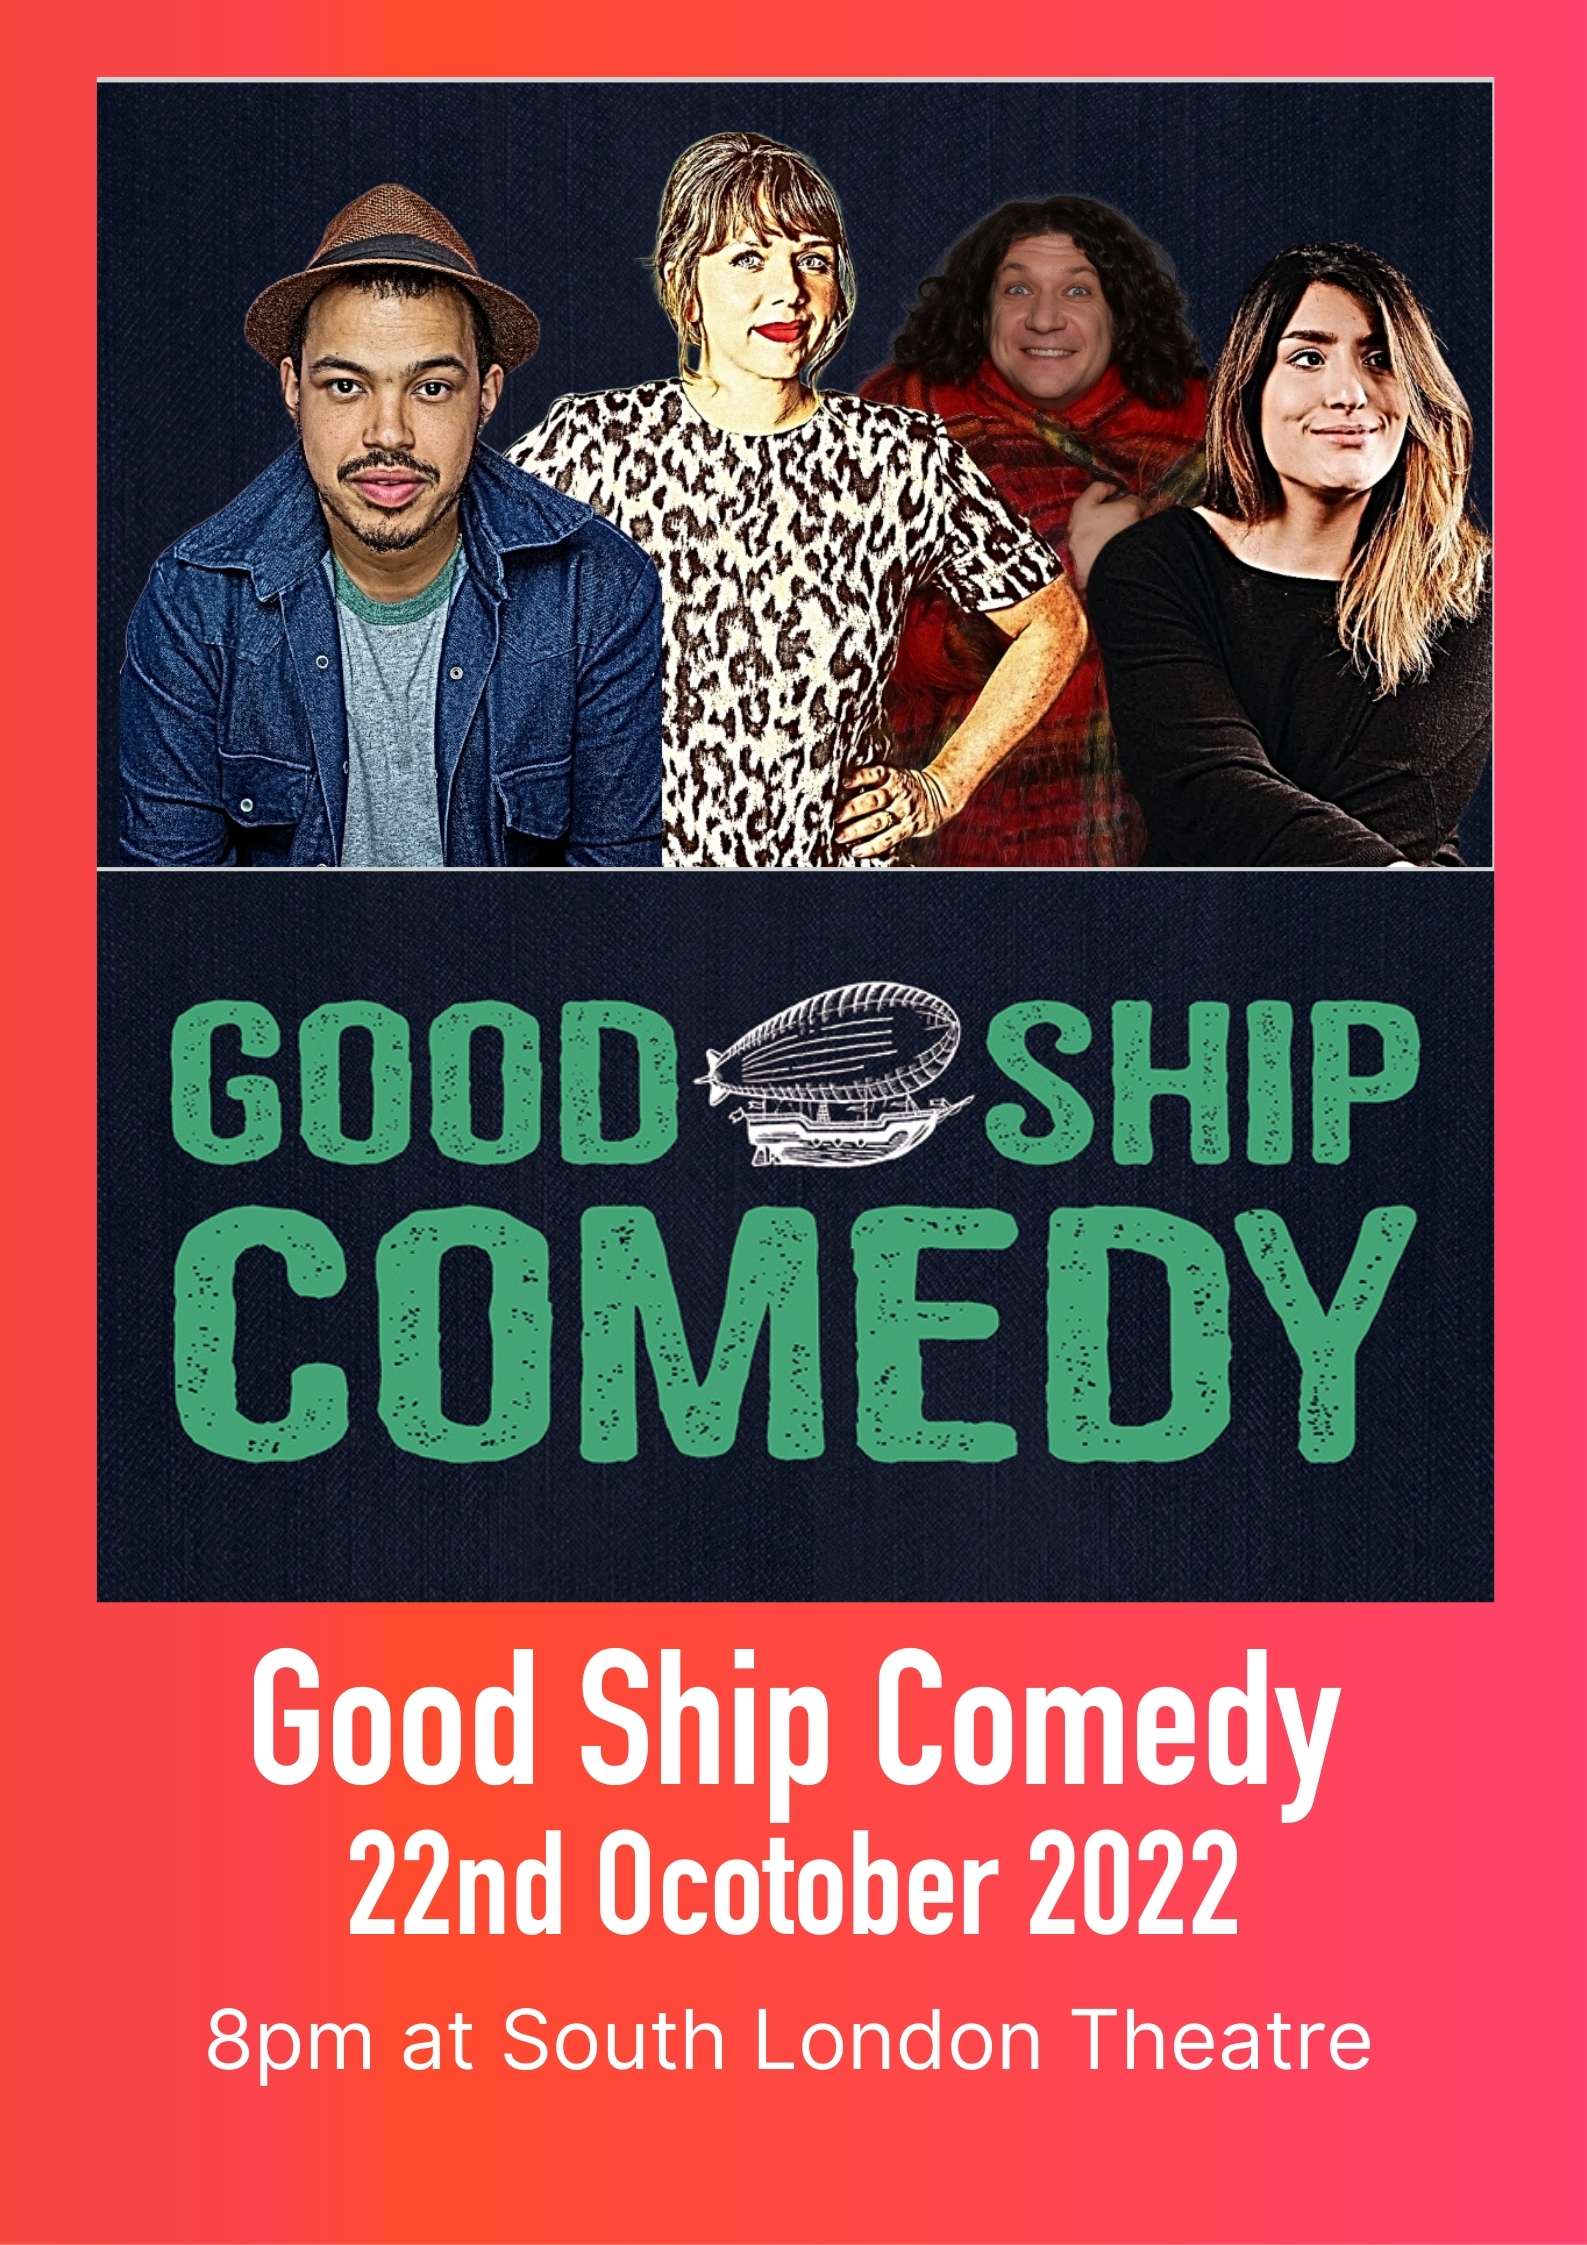 Good Ship Comedy Poster showing four people